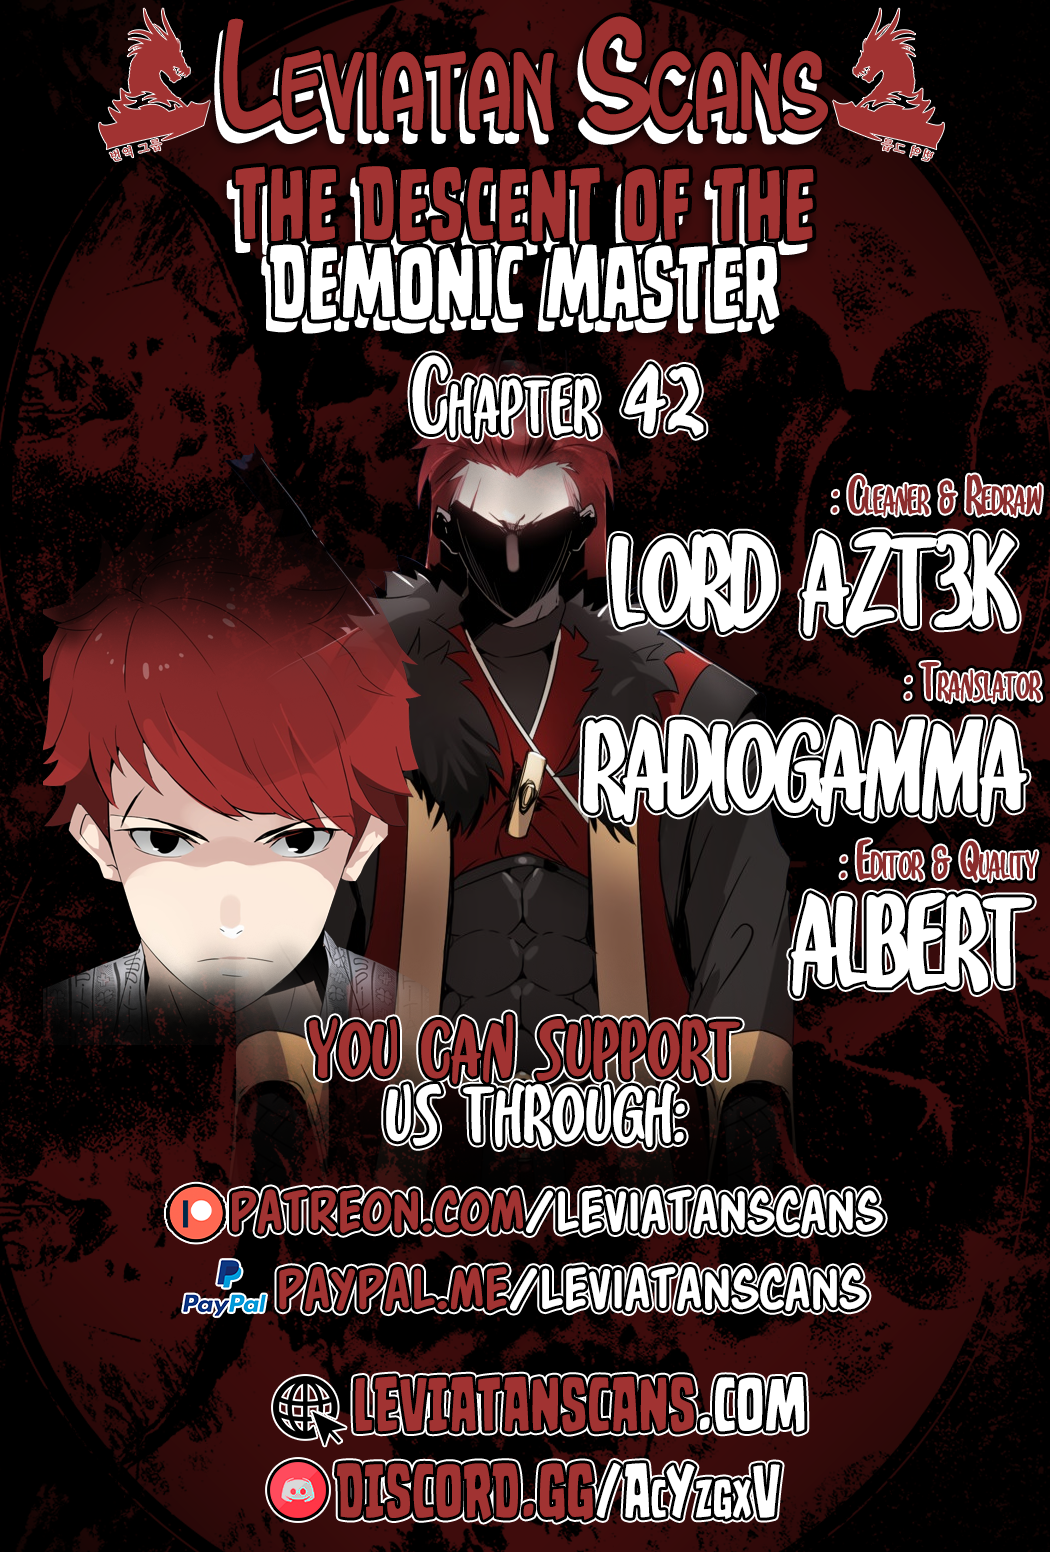 The Descent of the Demonic Master - Chapter 303 - Image 1